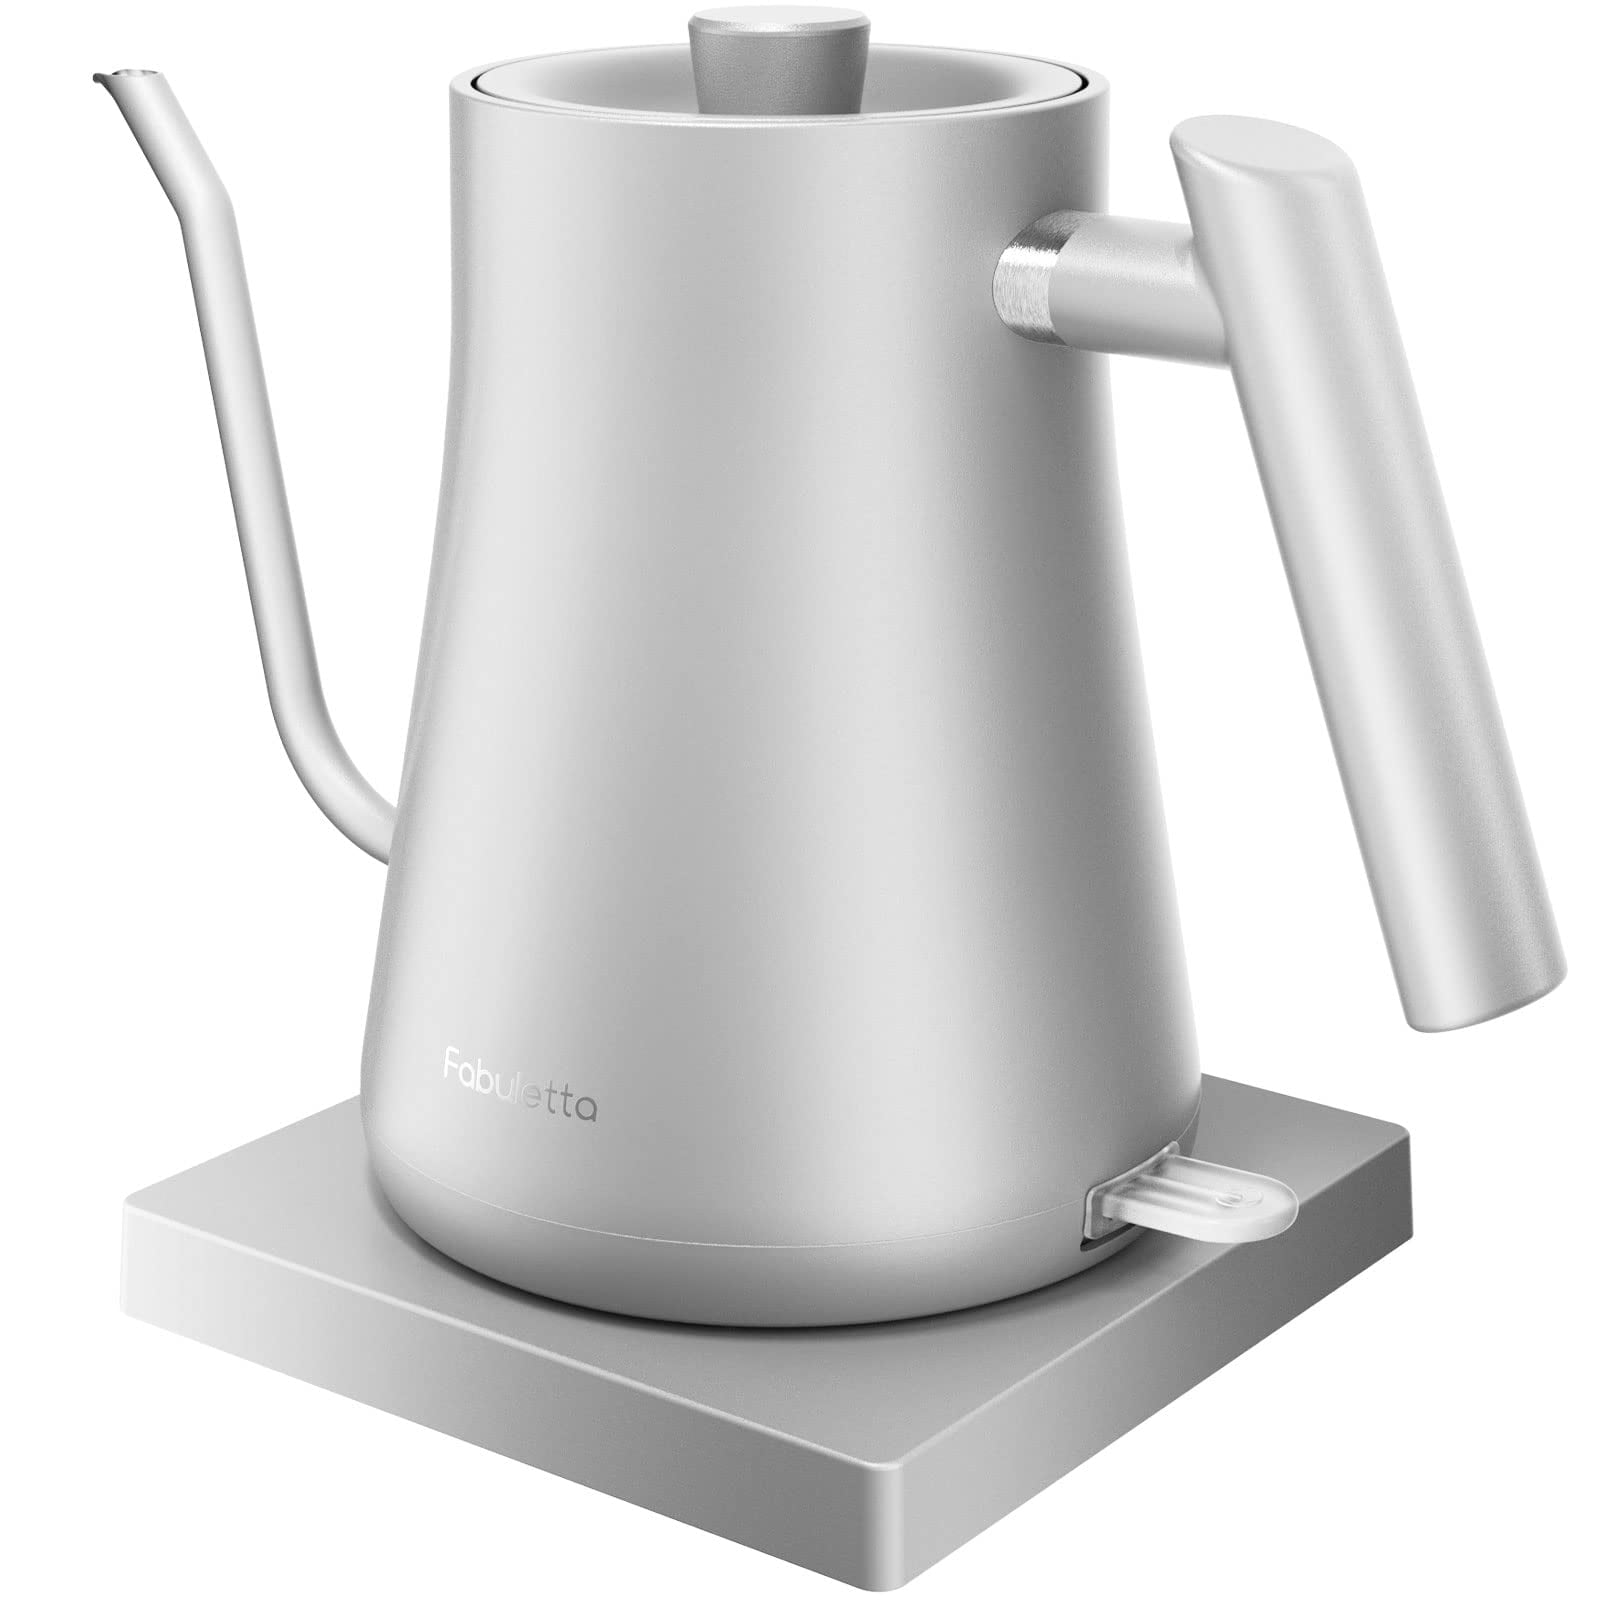  Fellow Stagg EKG Pro Electric Gooseneck Kettle - Pour-Over  Coffee and Tea Pot, Stainless Steel, Quick Heating, Matte White, 0.9 Liter:  Home & Kitchen